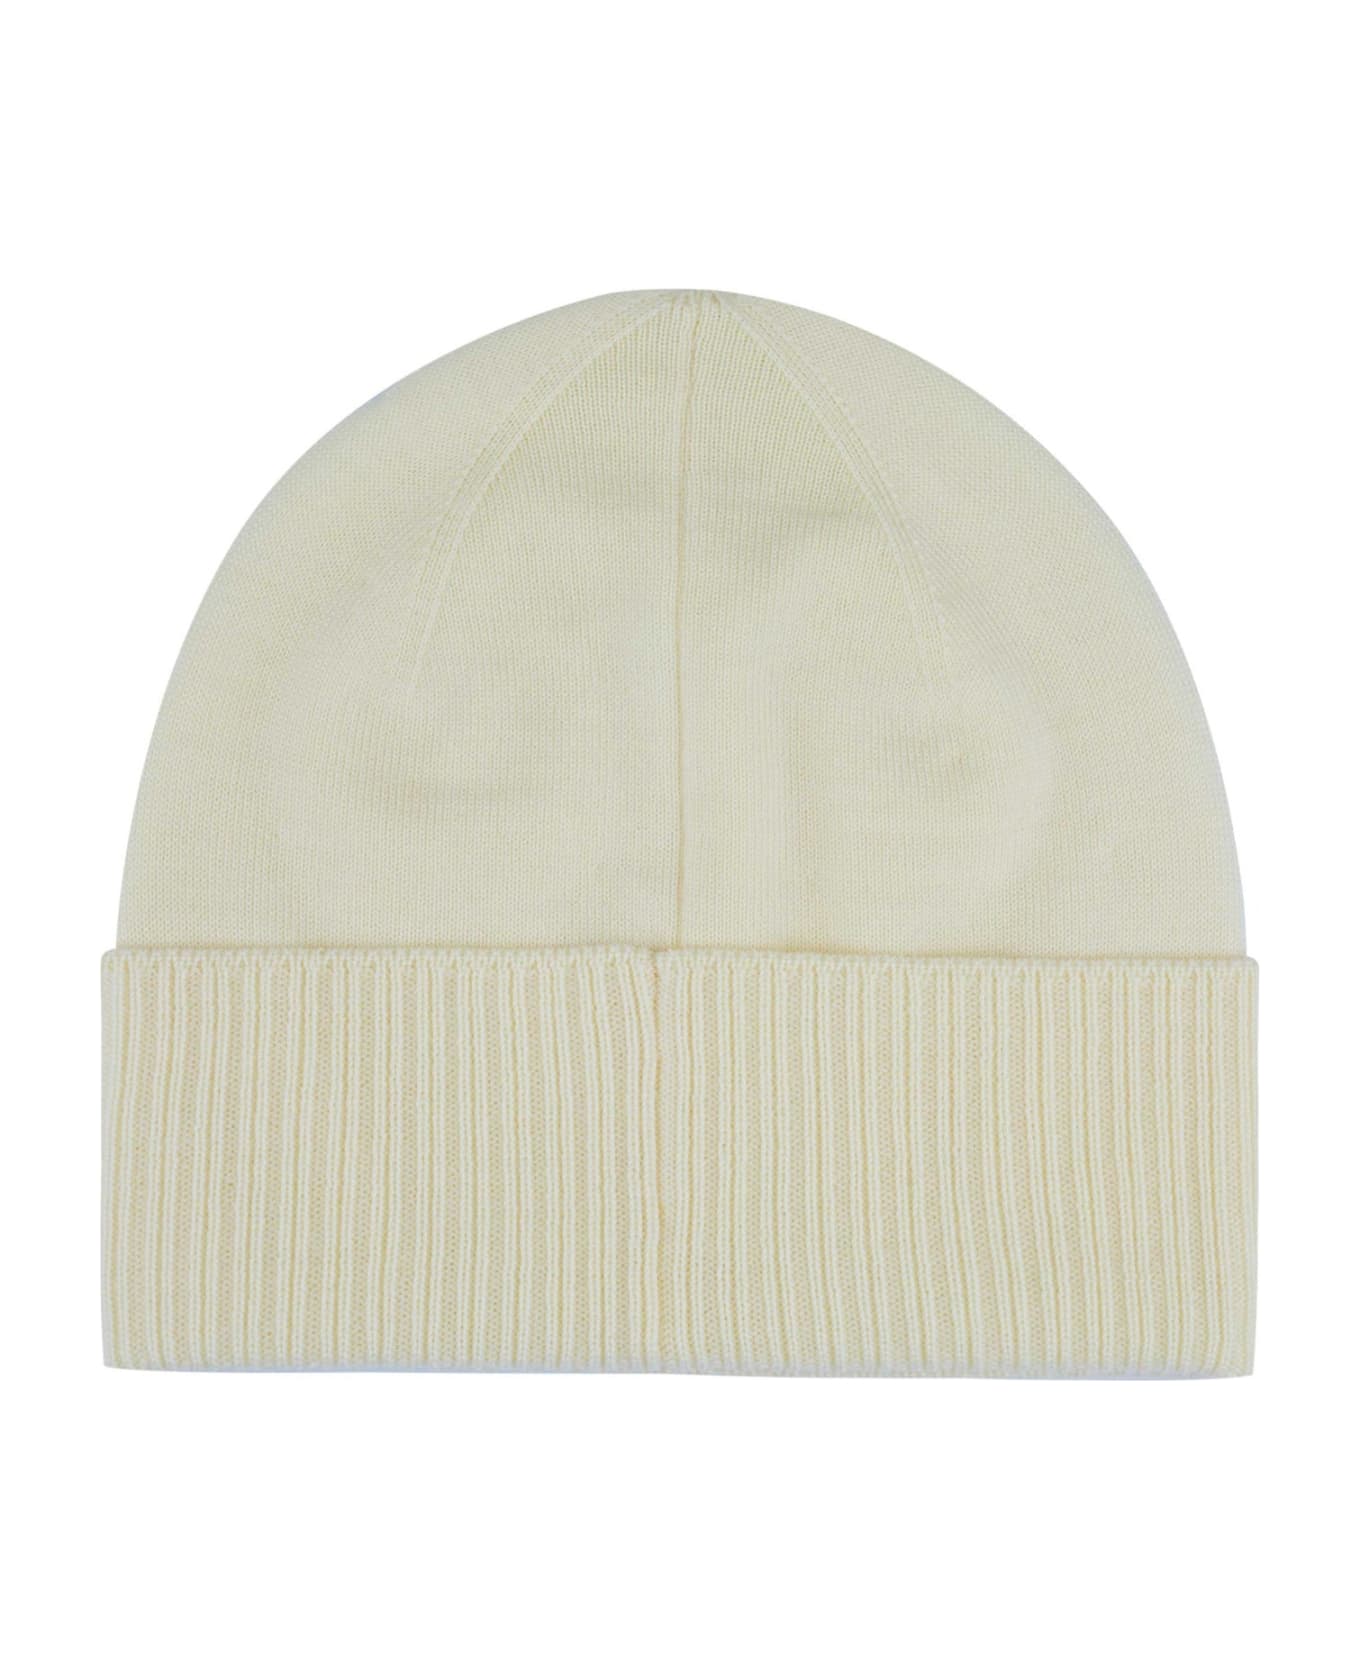 Givenchy Wool Logo Stealth Hat - White